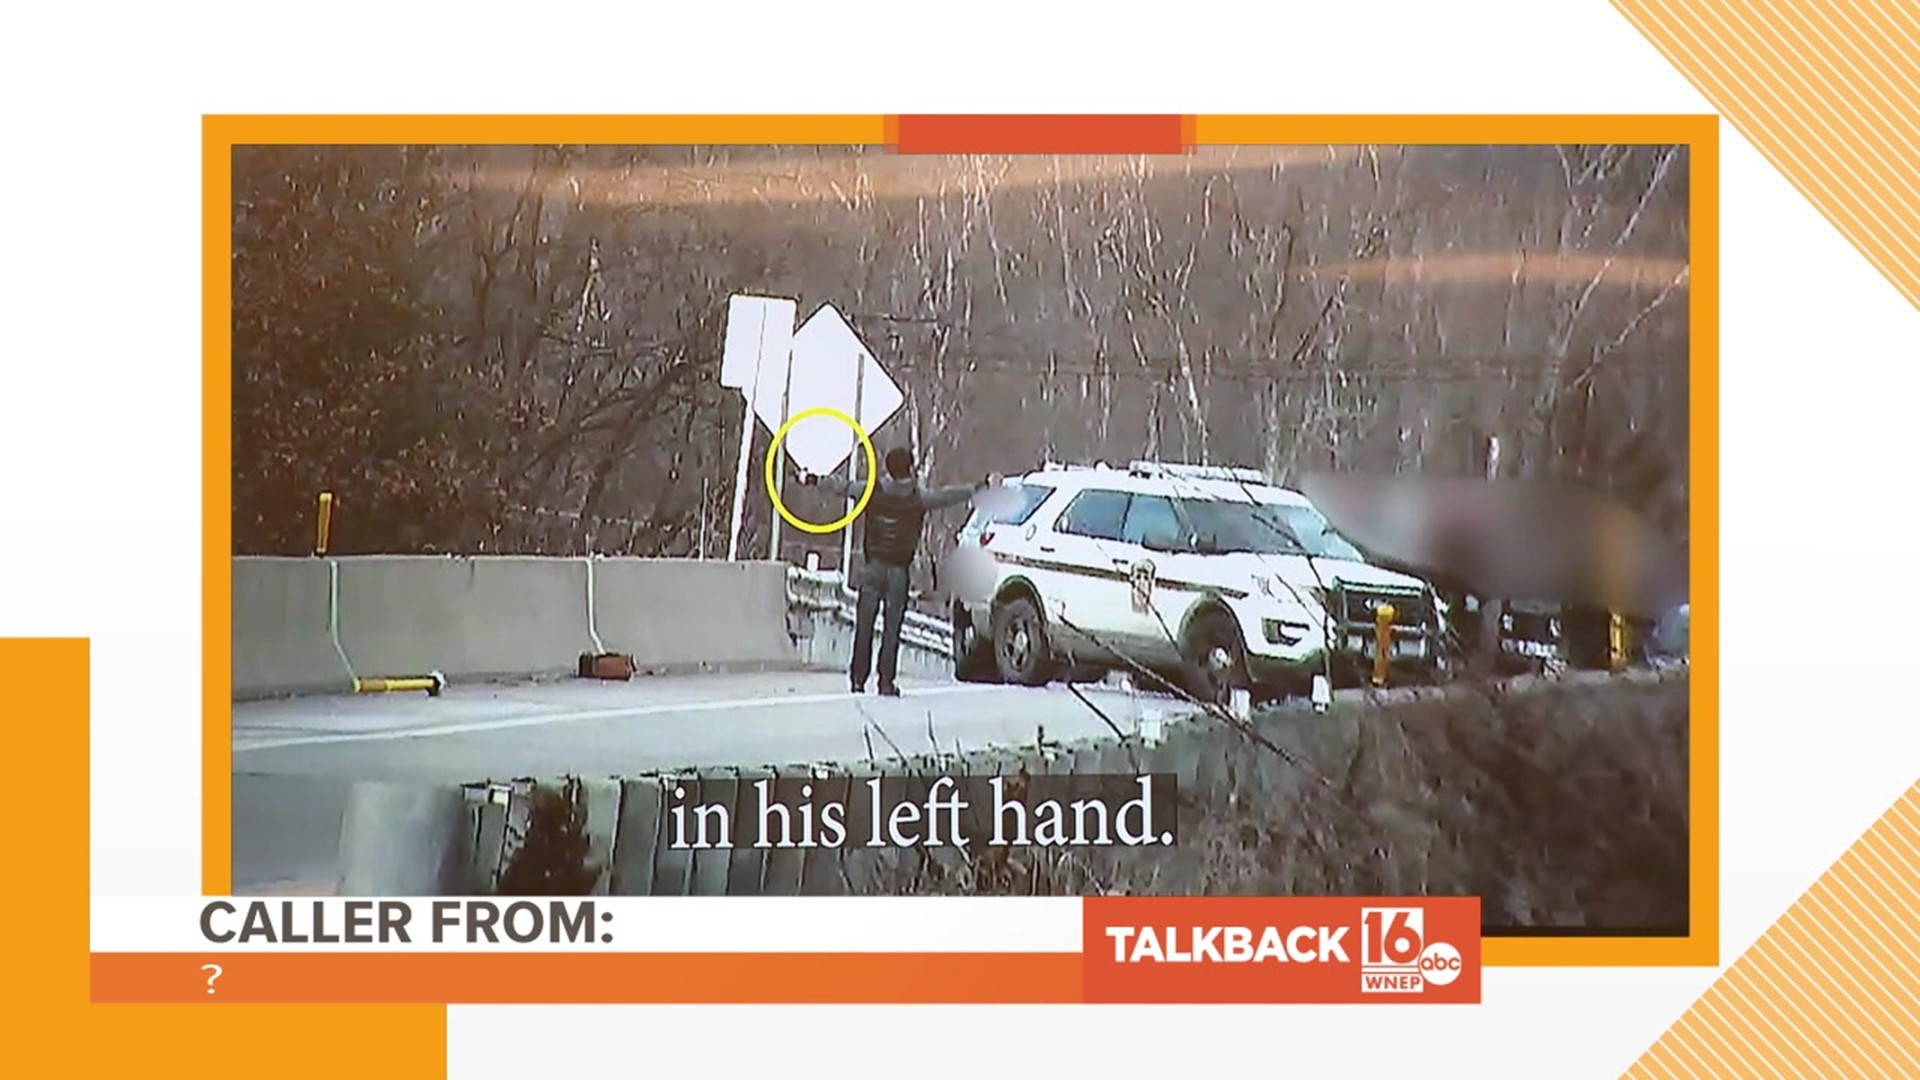 A number of callers are upset in the ruling that the shooting of a man on a bridge in the Poconos was justified.